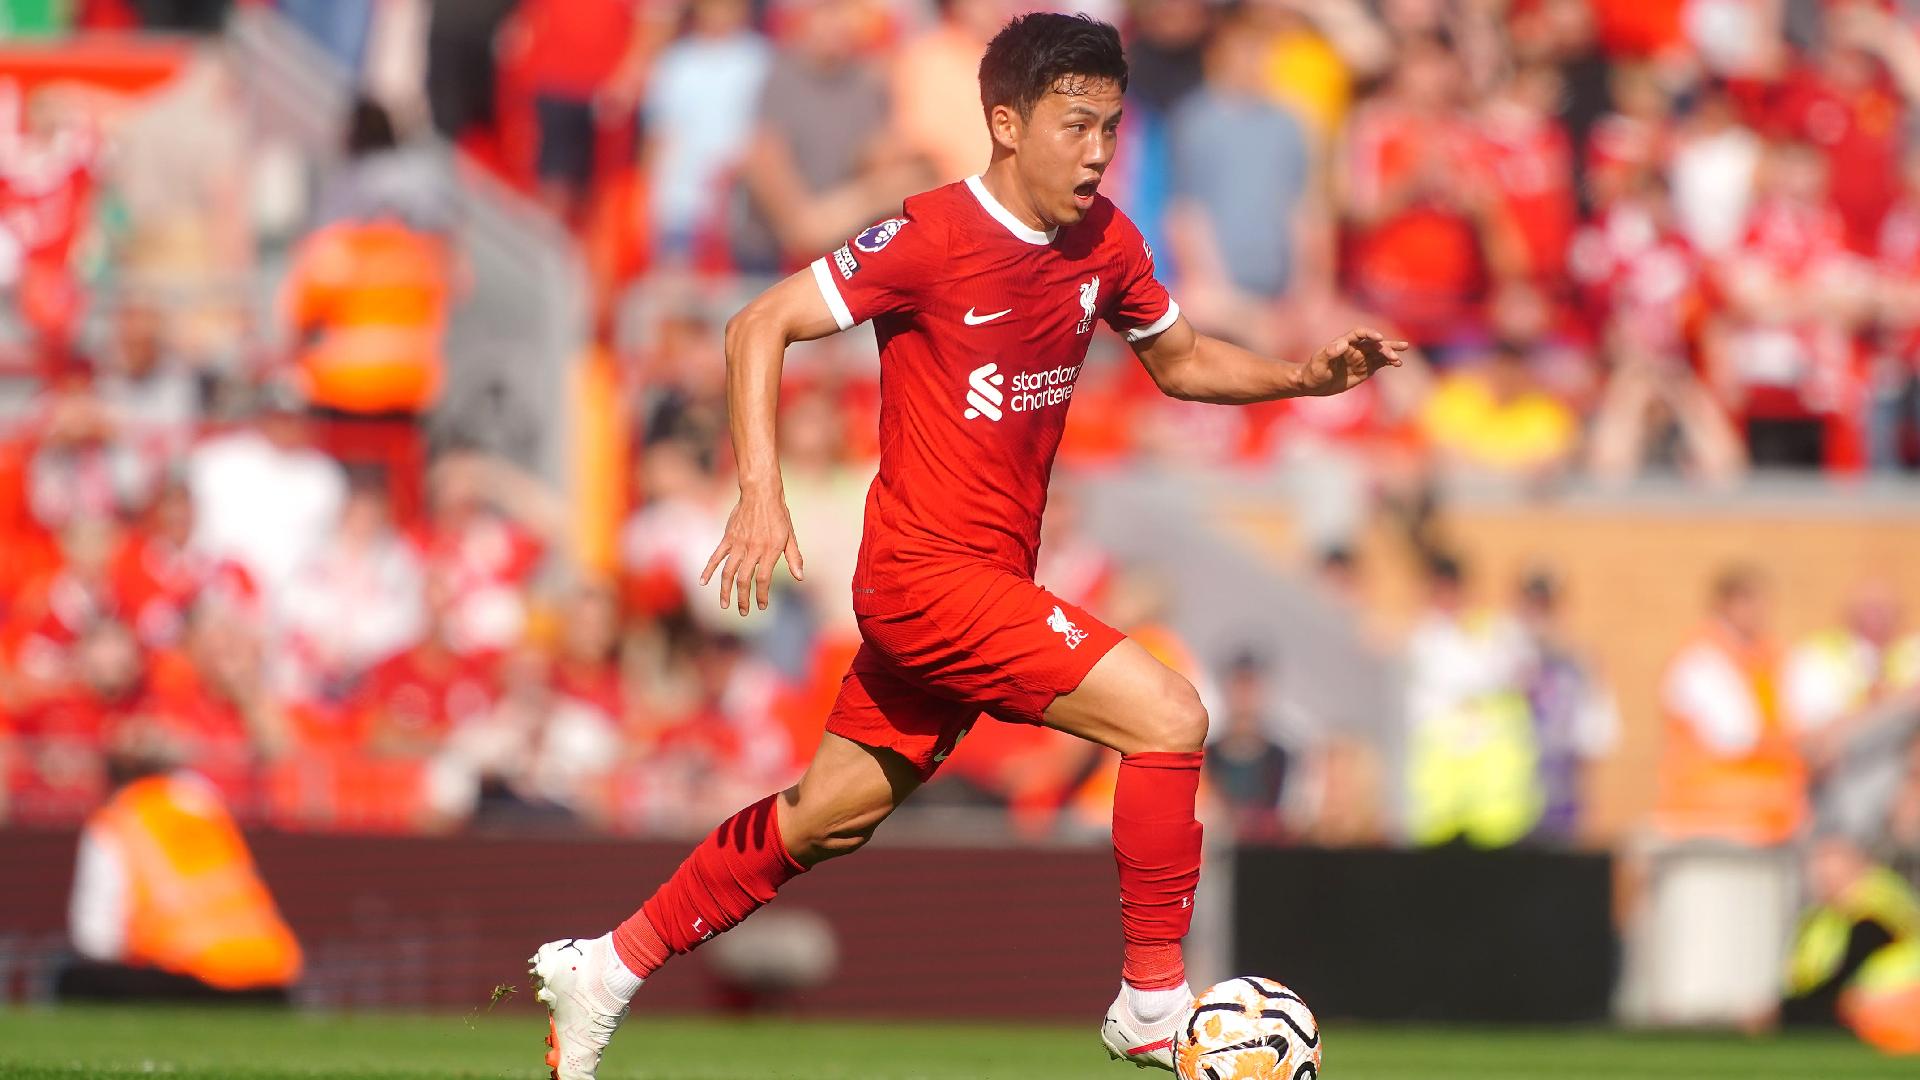 Owen Hargreaves left stunned by Wataru Endo after Liverpool debut. 